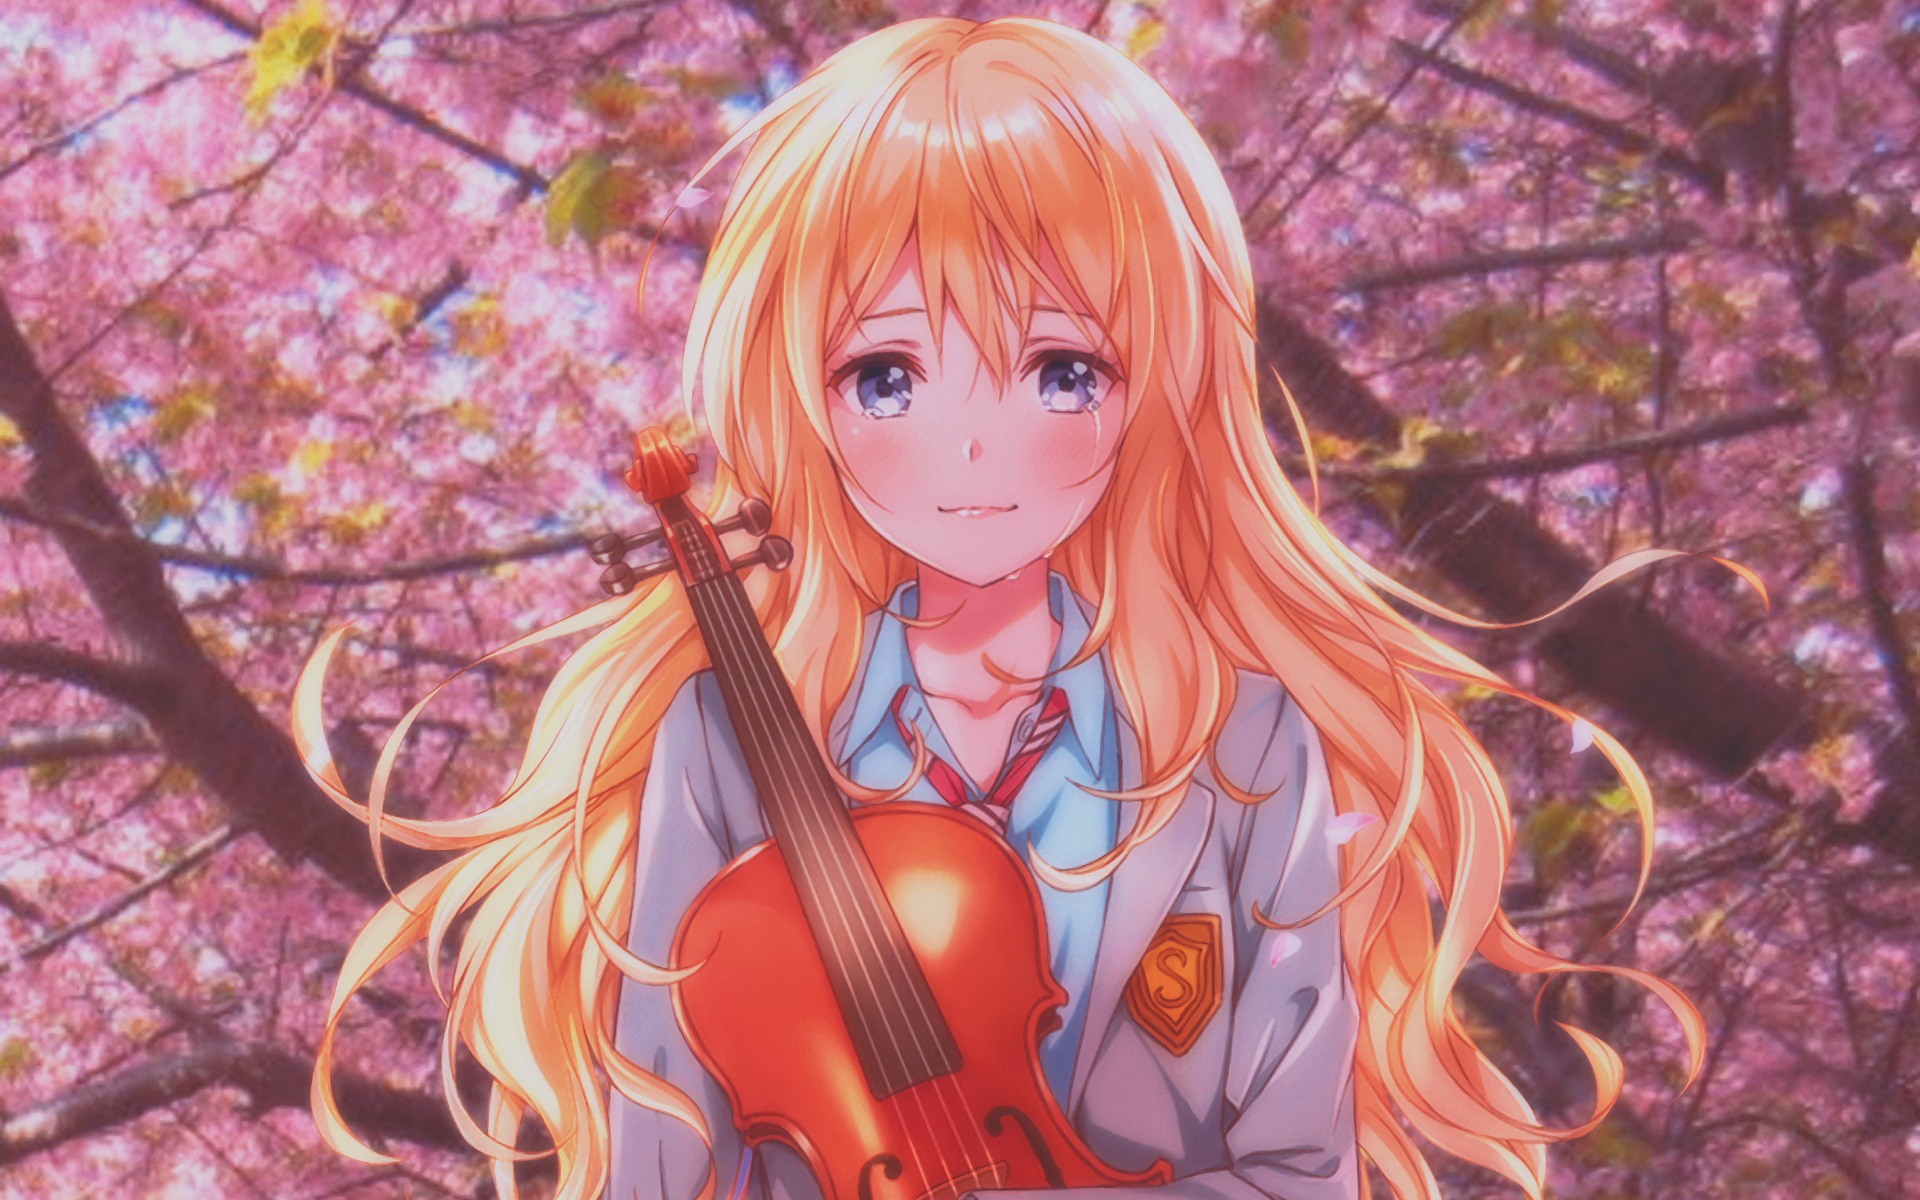 9. Your Lie in April - wide 1